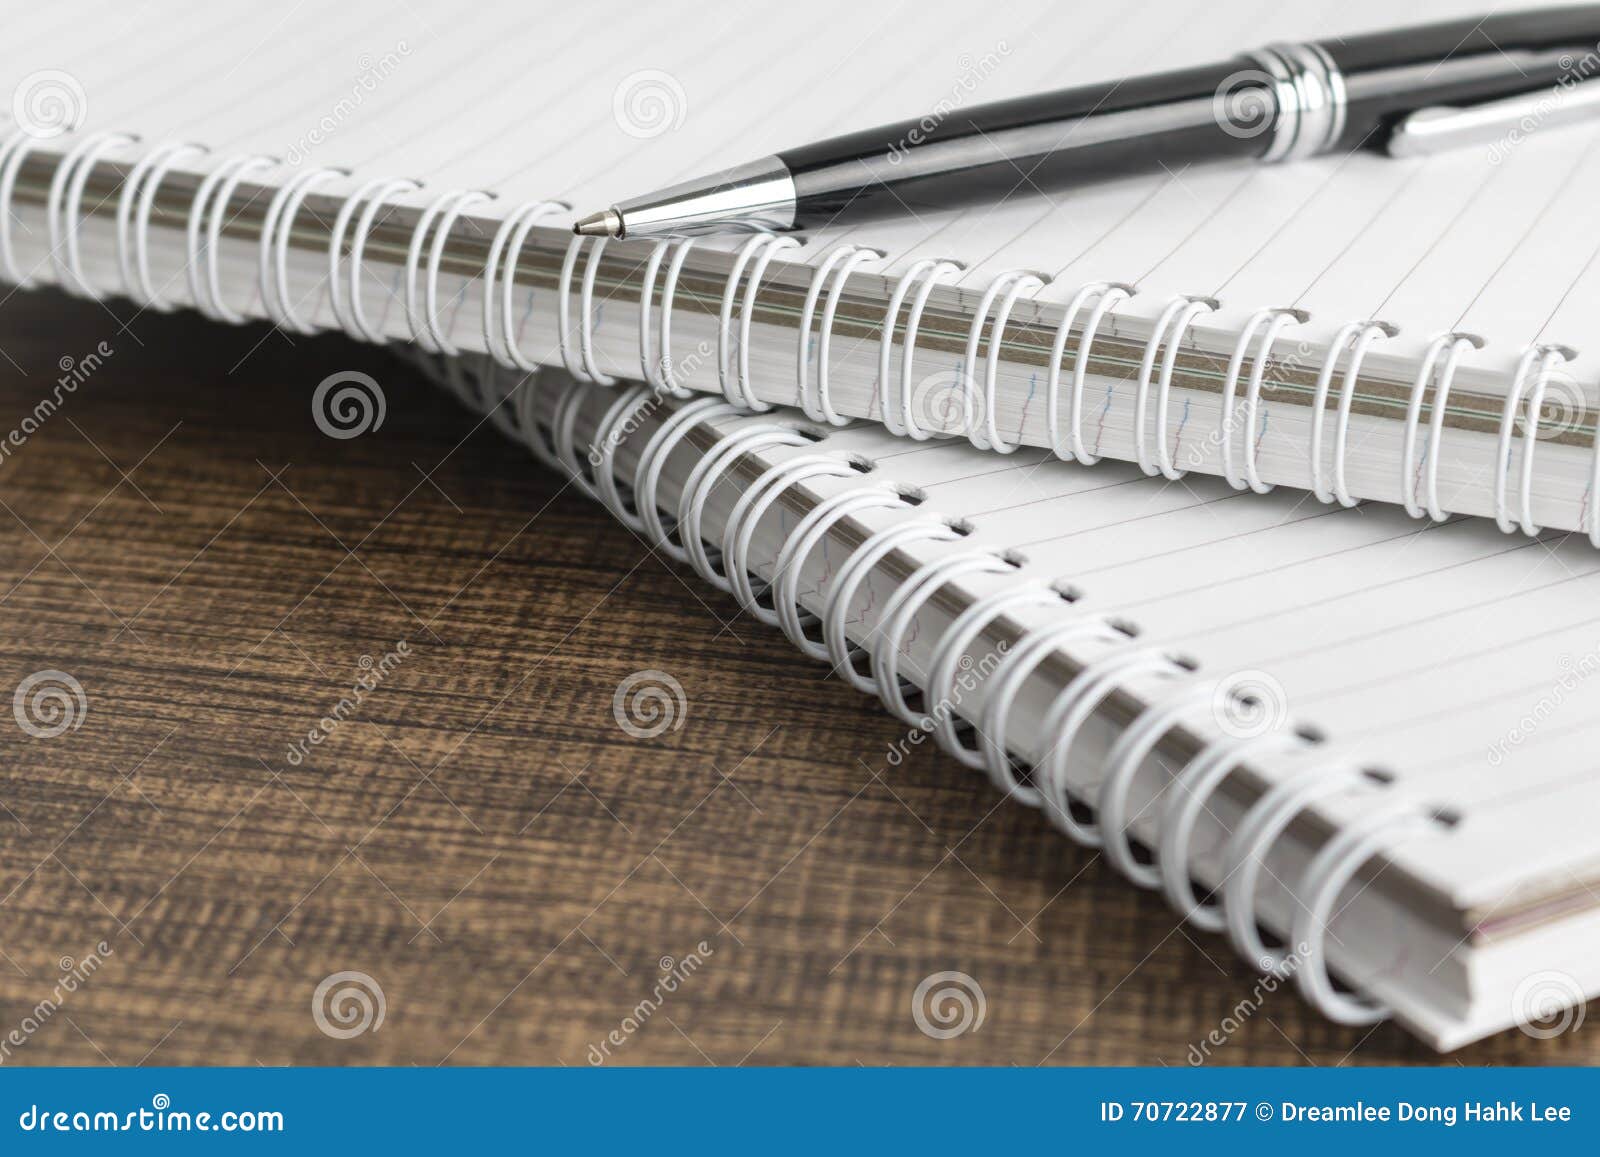 note pad and pen on the wooden table